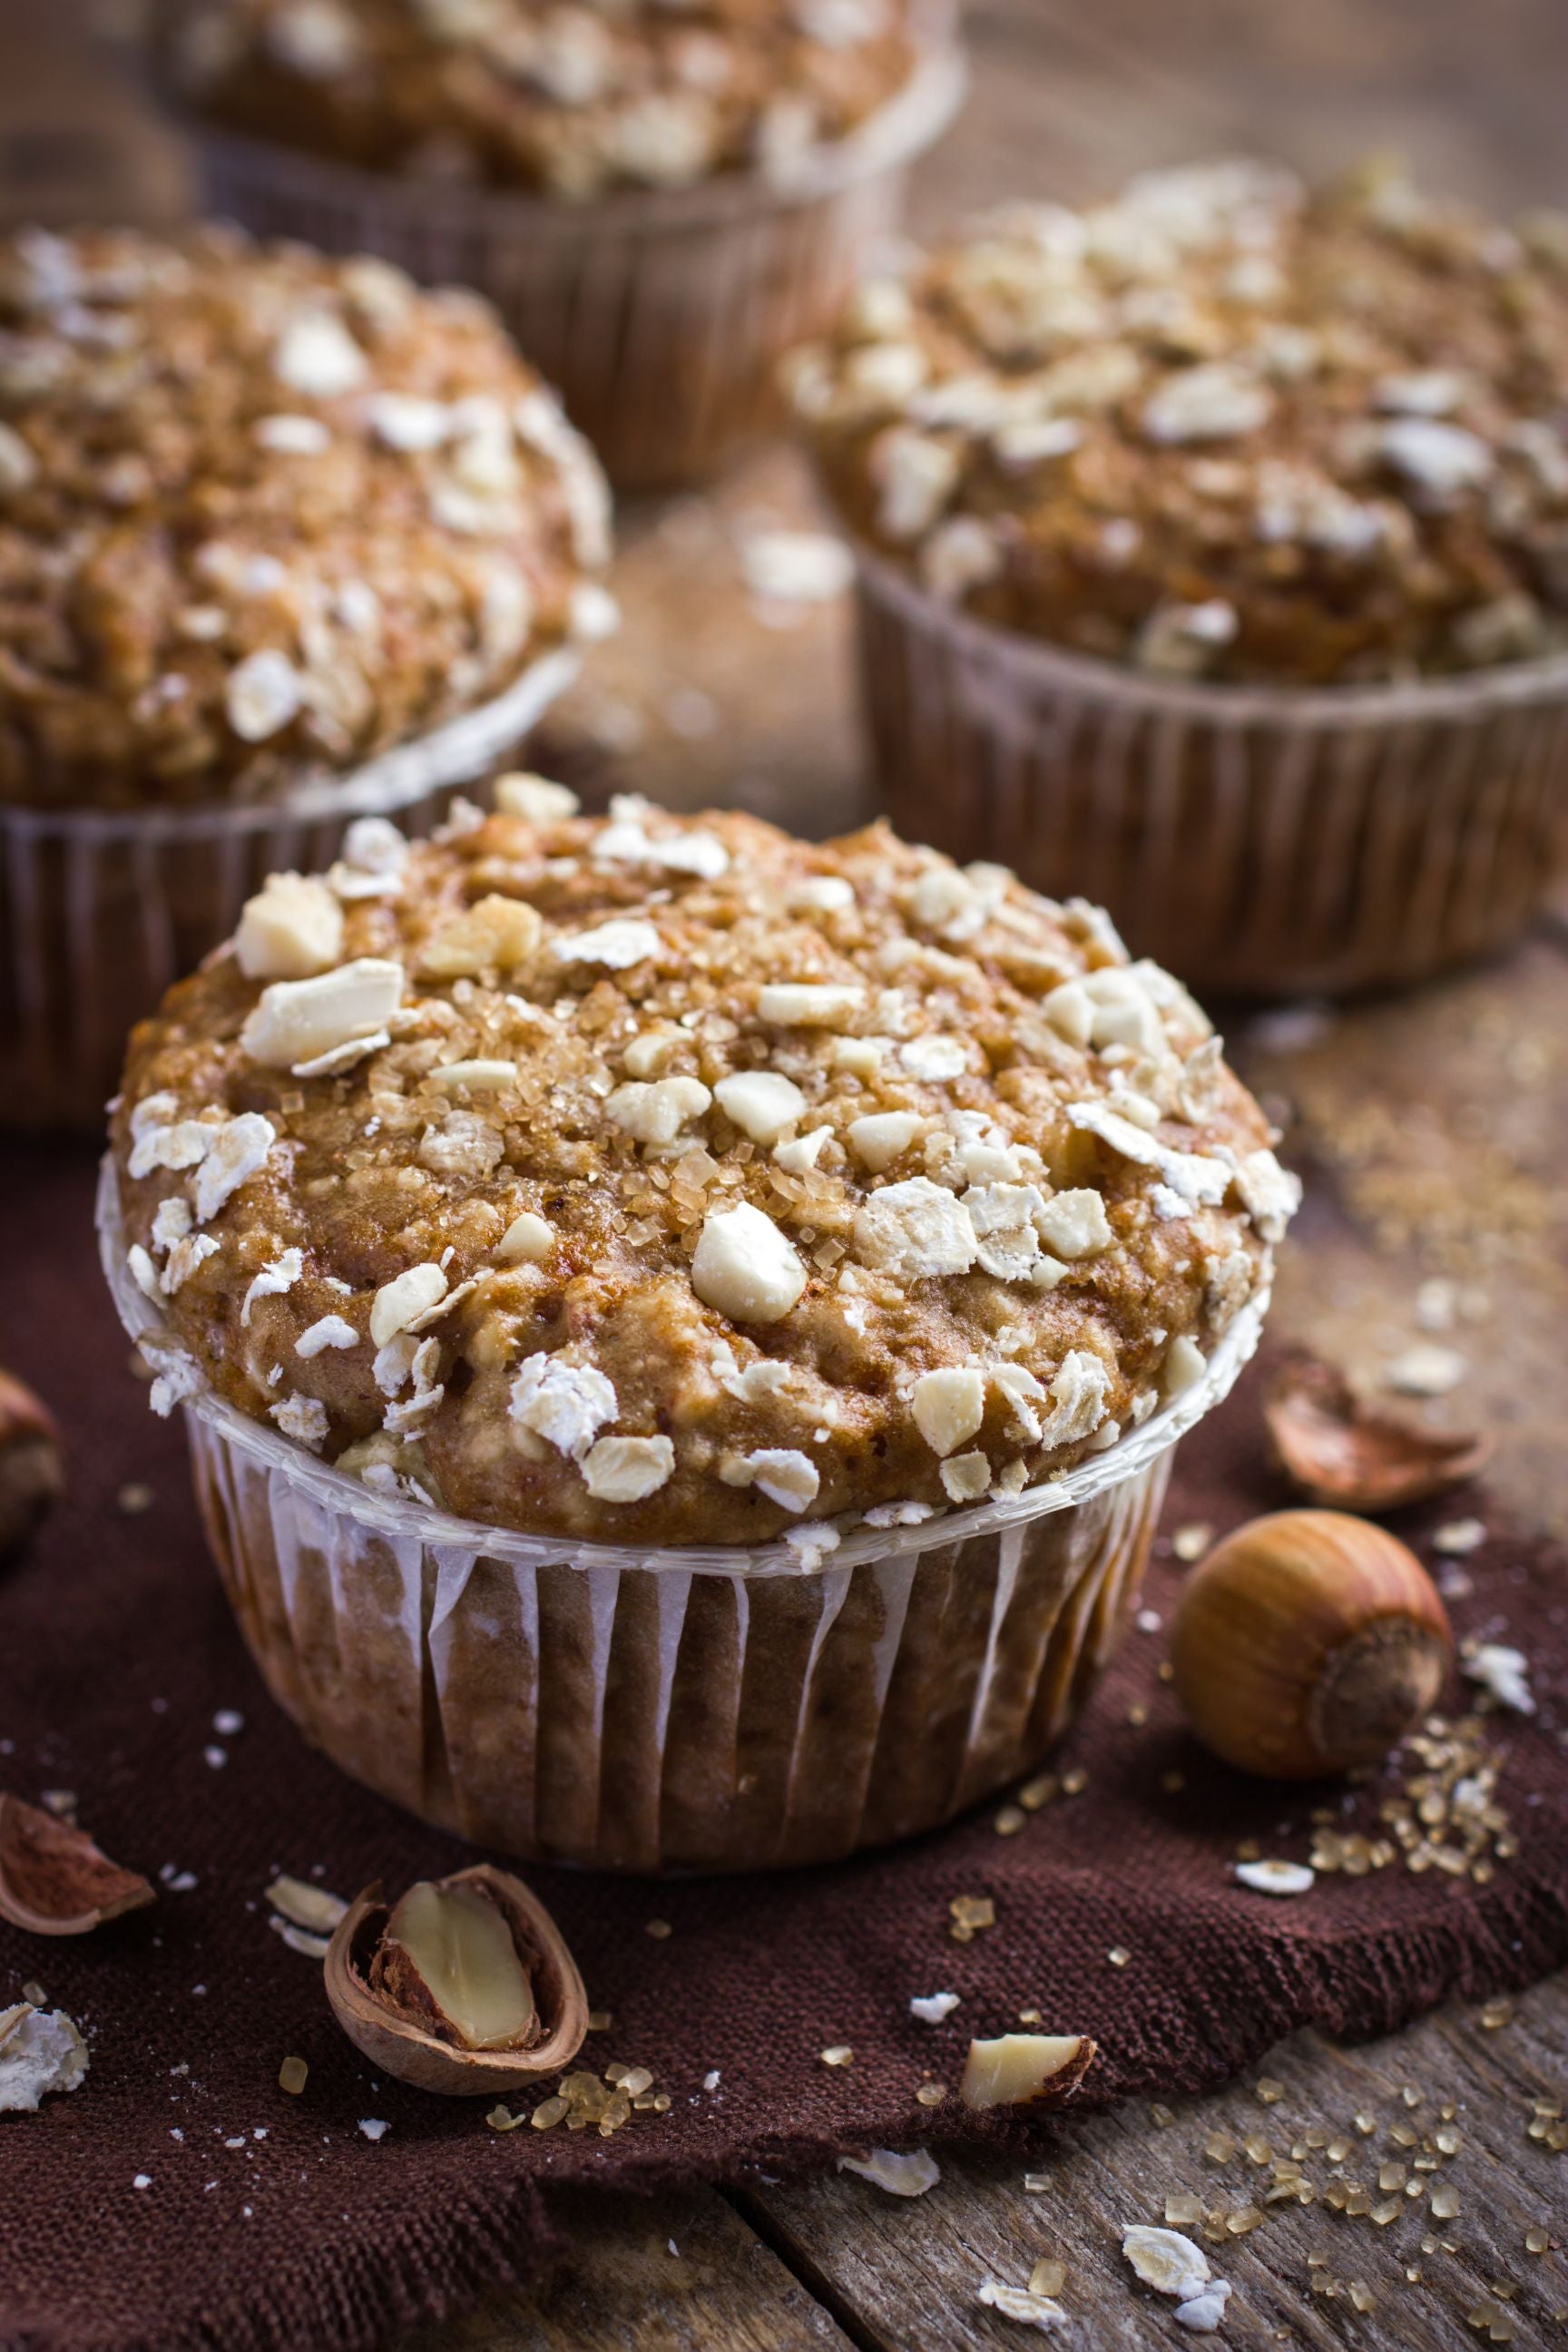 Organic Oat Bran Muffins: A Mouthwatering and Nutritious Snack You'll Love!